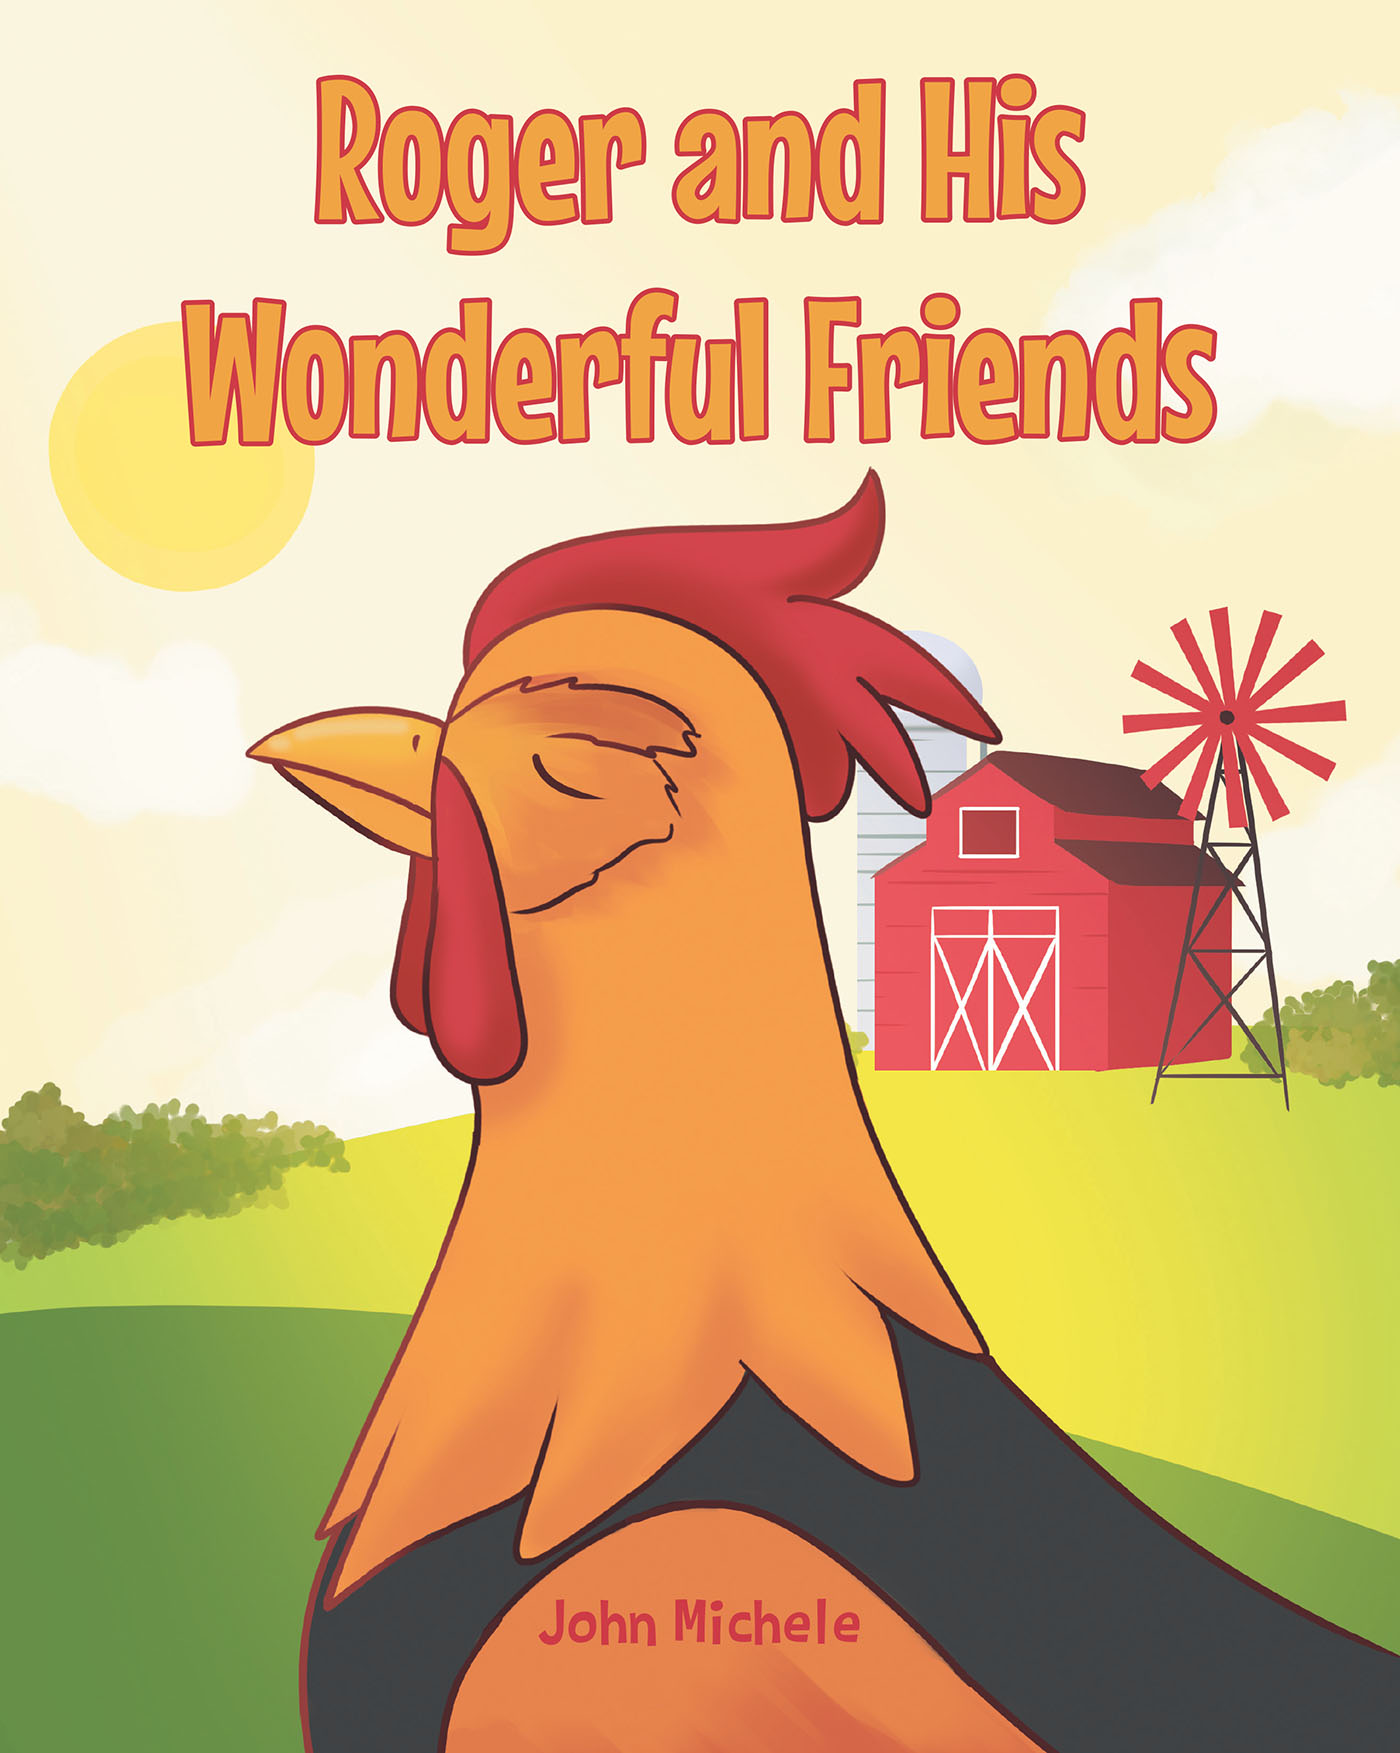 Author John Michele’s New Book, "Roger and His Wonderful Friends," is a Chapter Book That Explores the Many Wonderful Stories Uncovered on a Magical Adventure